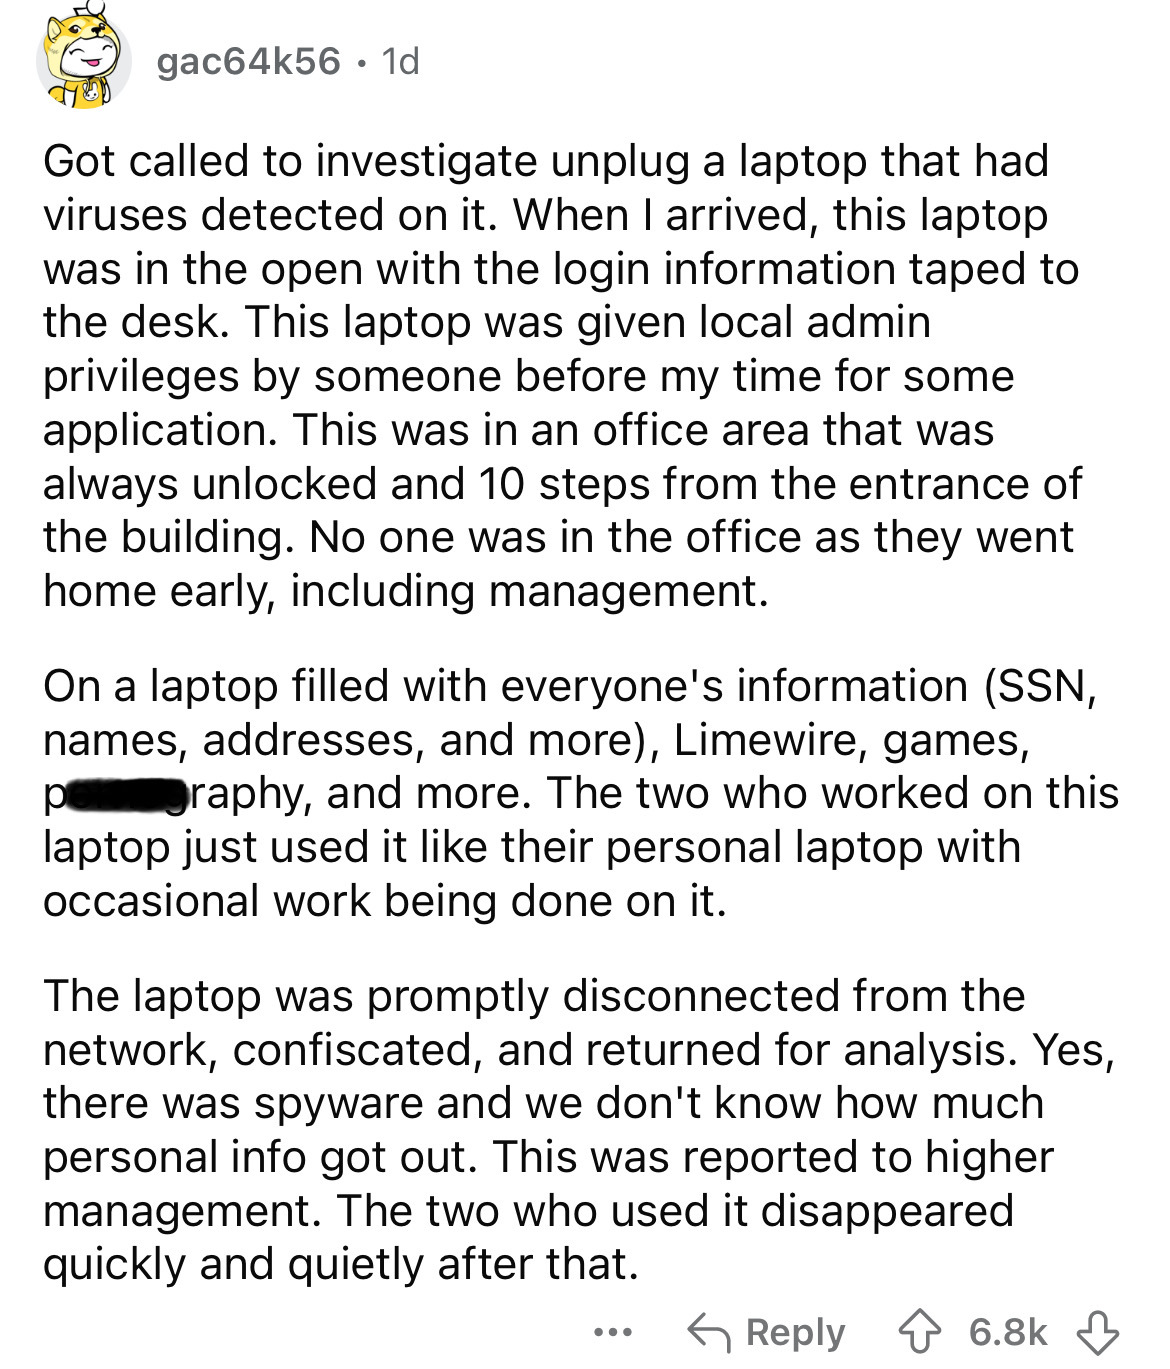 document - gac64k56.1d Got called to investigate unplug a laptop that had viruses detected on it. When I arrived, this laptop was in the open with the login information taped to the desk. This laptop was given local admin privileges by someone before my t